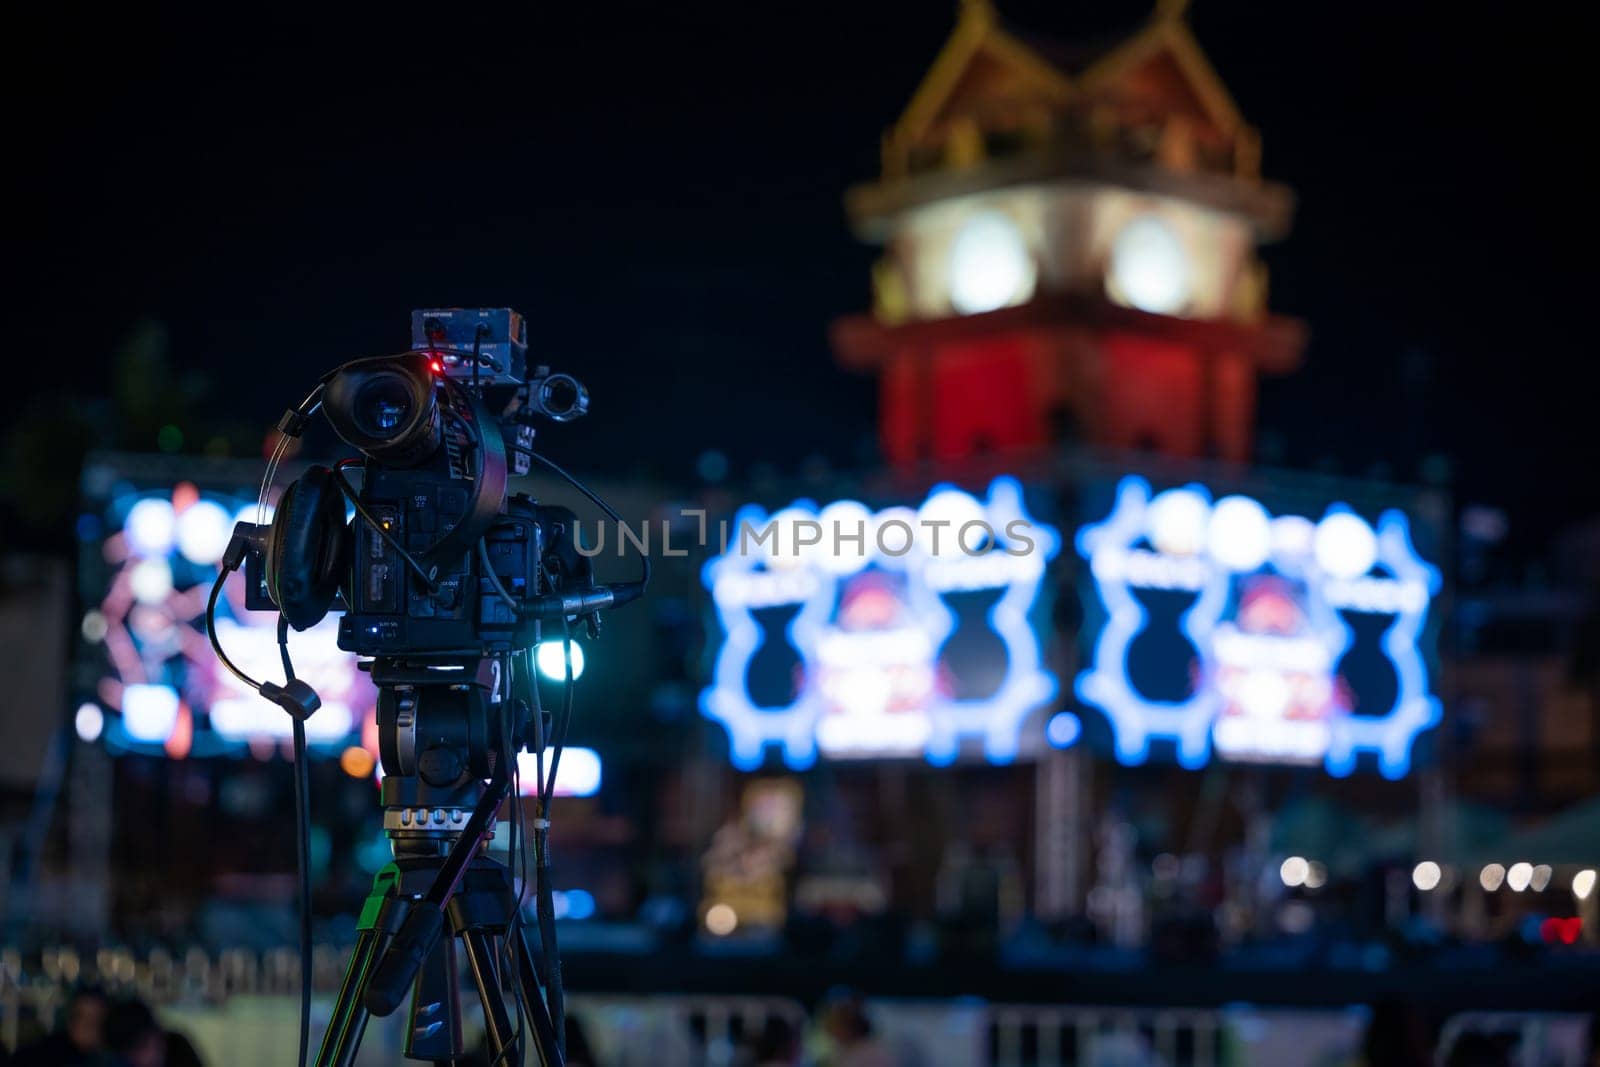 Video production team covers live event on stage. Professional crew utilizes multimedia for movie-like streaming. Expertise in cinematography and live broadcasting, Video equipment